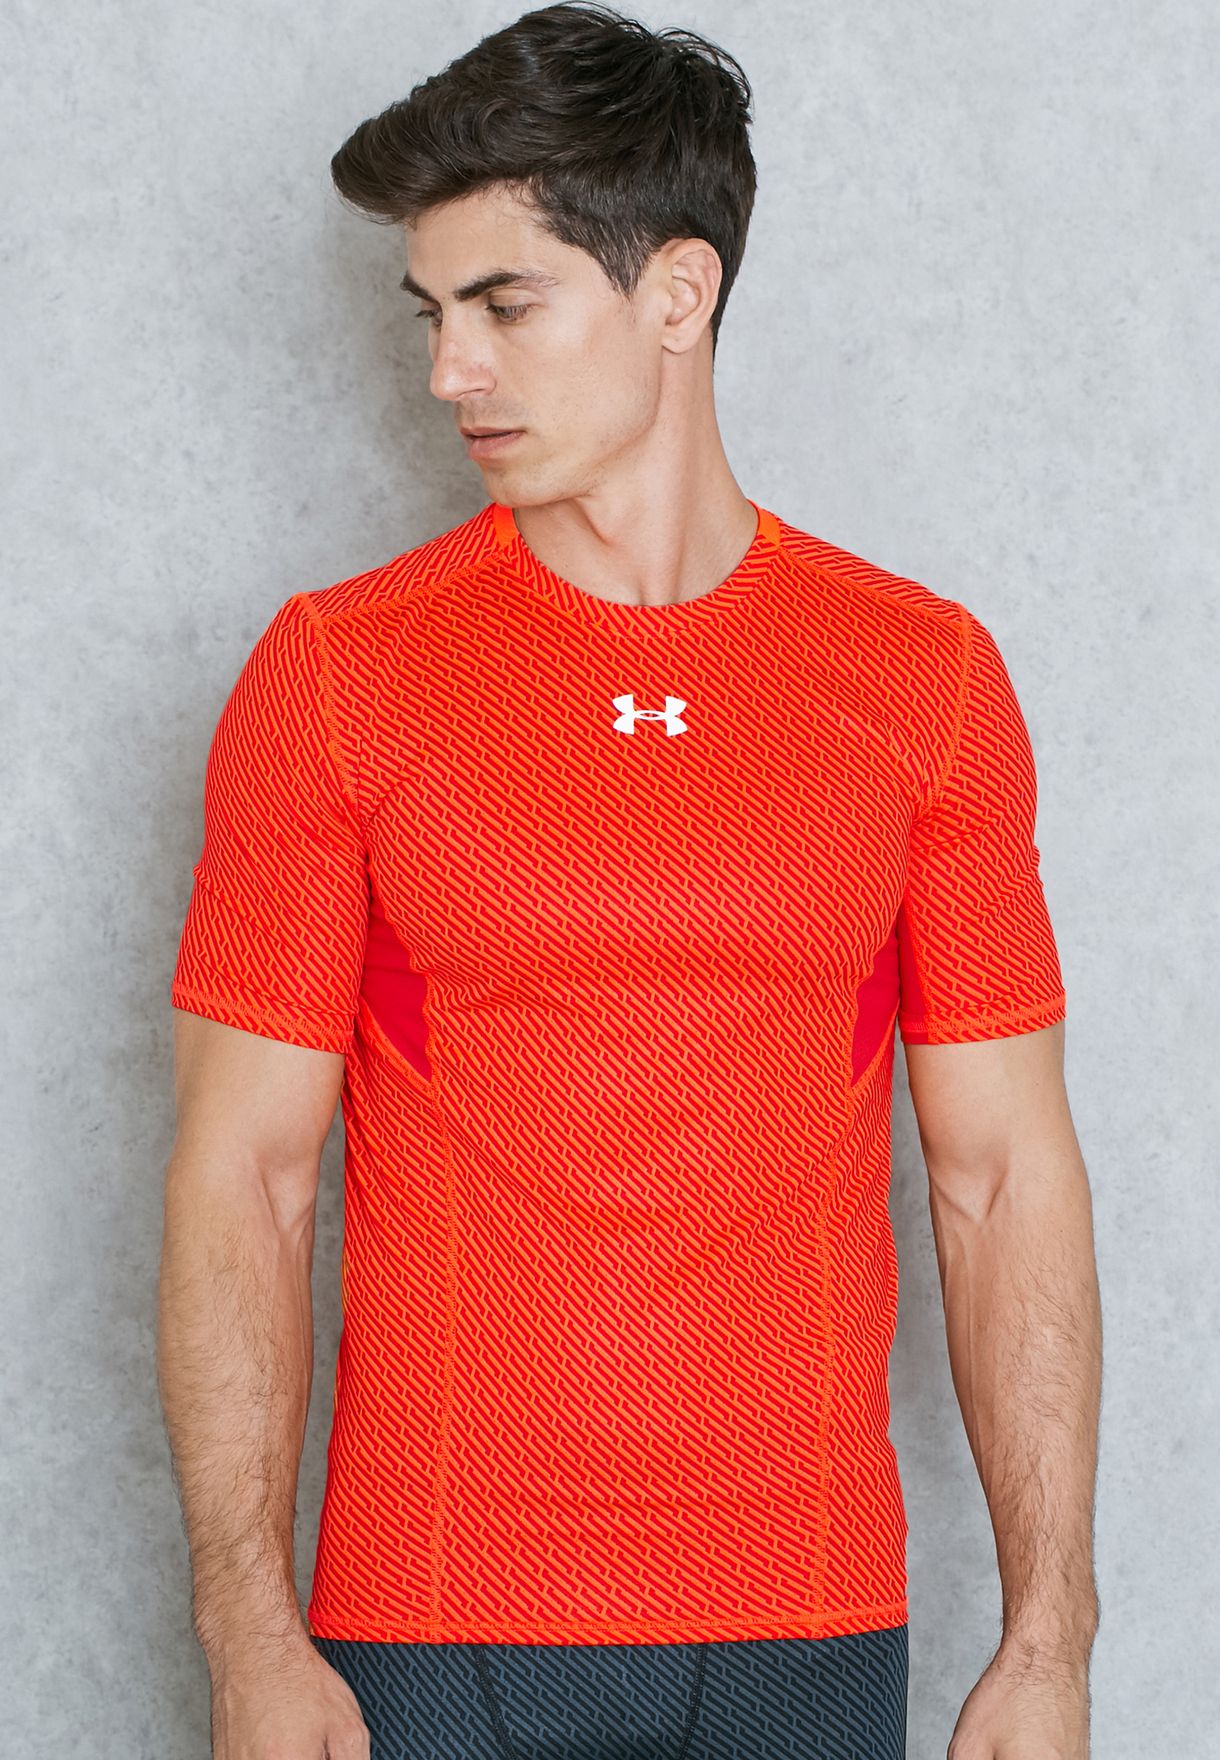 under armour coolswitch compression